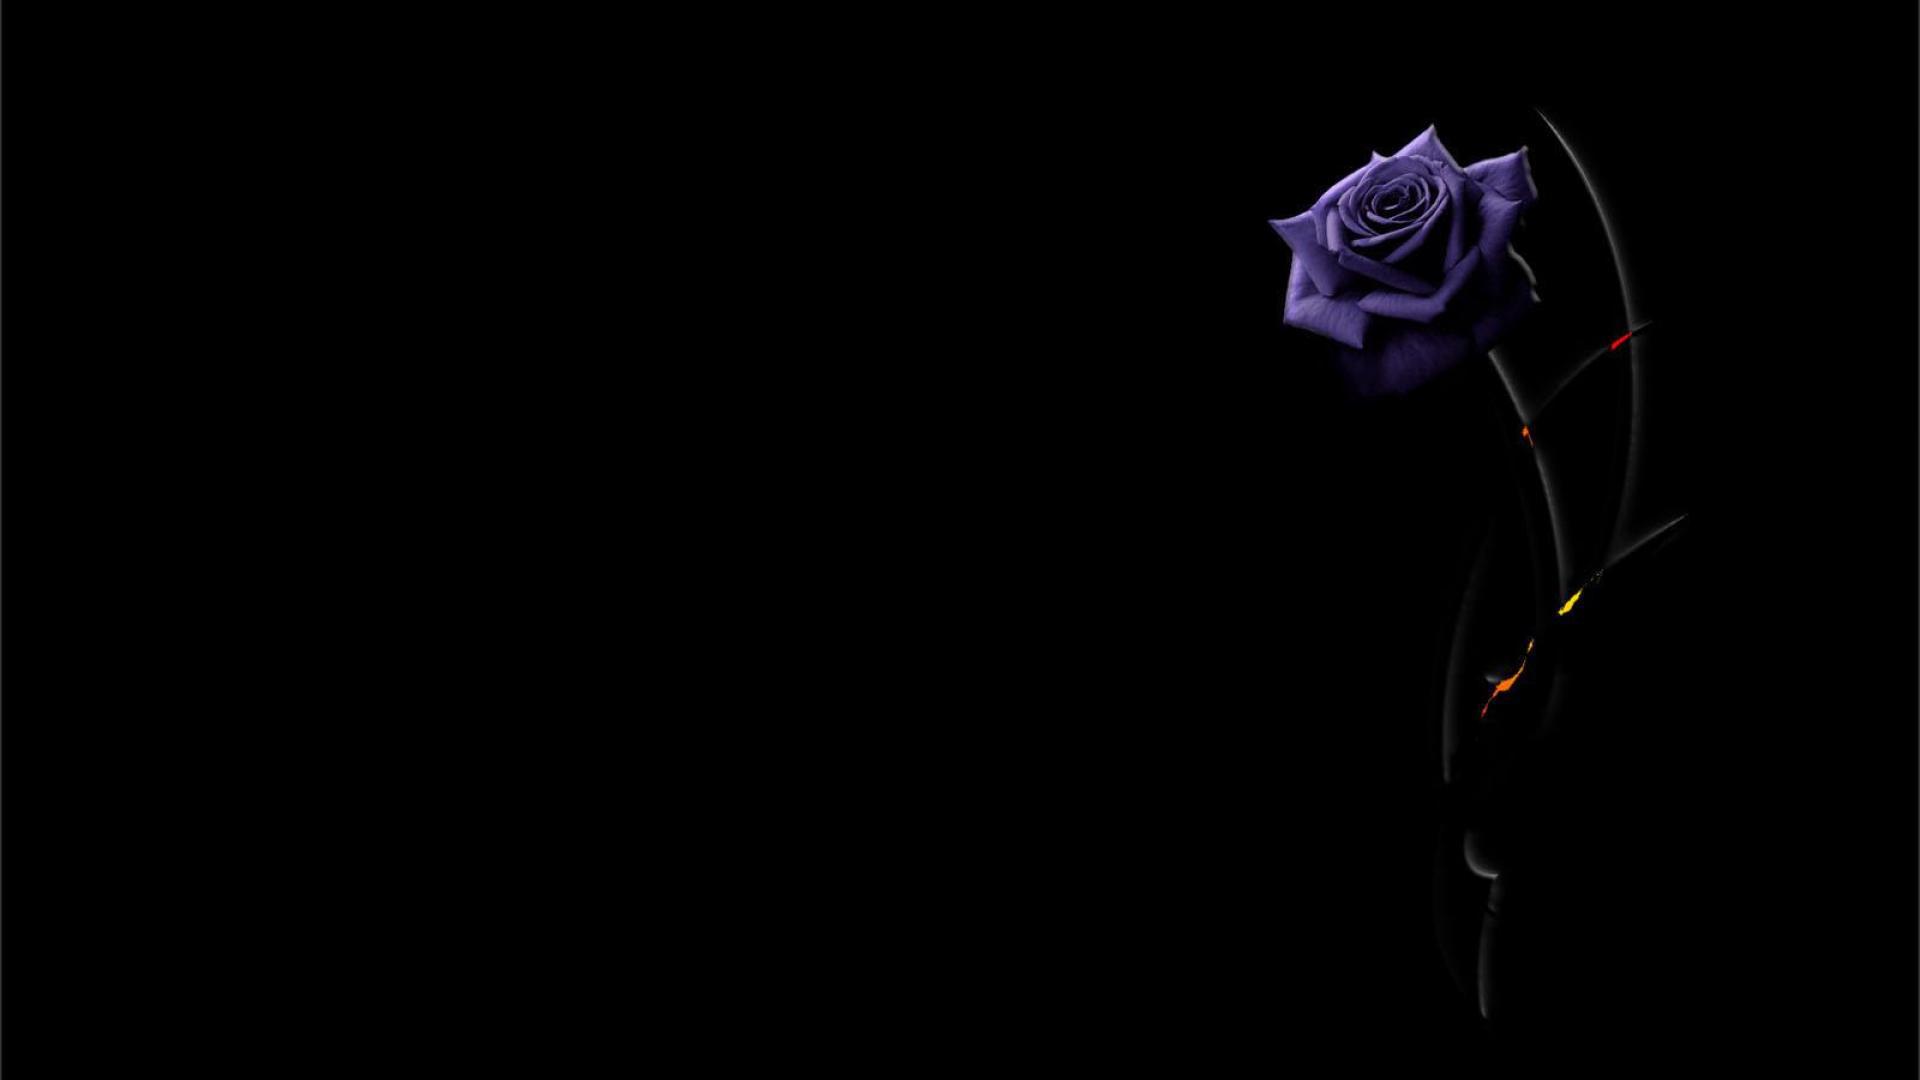 purple rose on a black background wallpapers and images   wallpapers